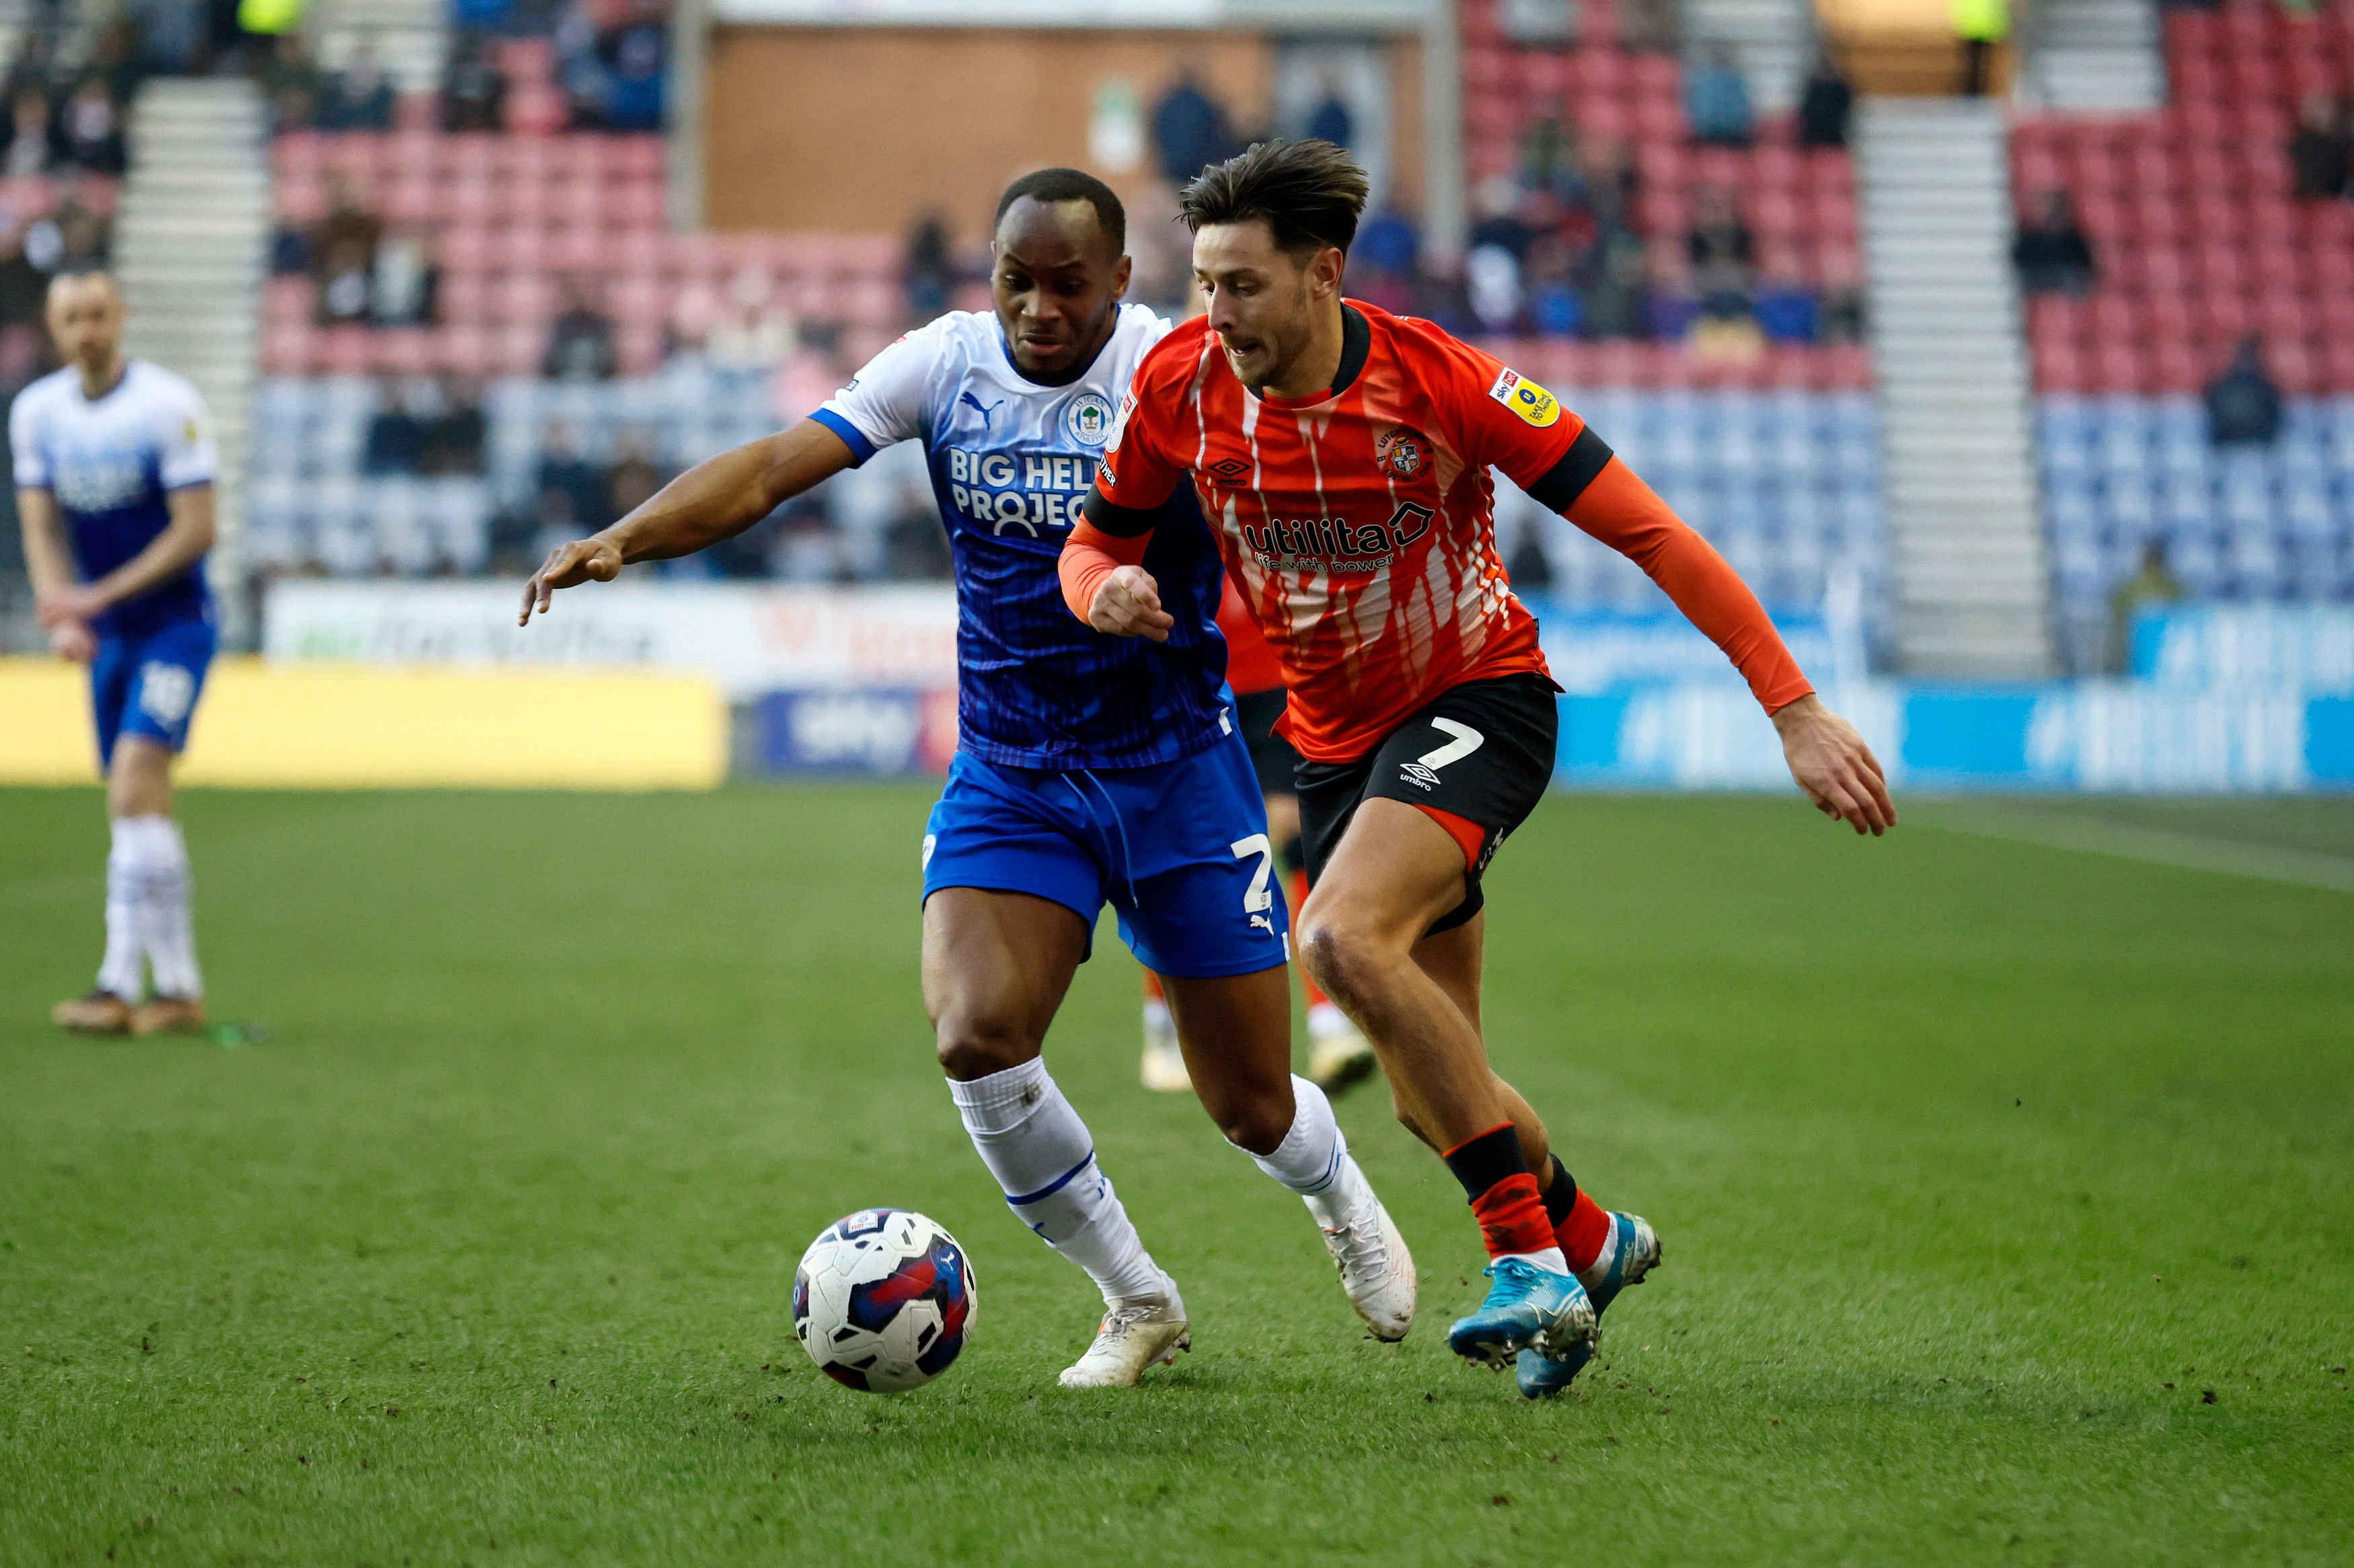 Luton Town’s Harry Cornick and Wigan Athletic’s Ryan Nyambe challenge for the ball